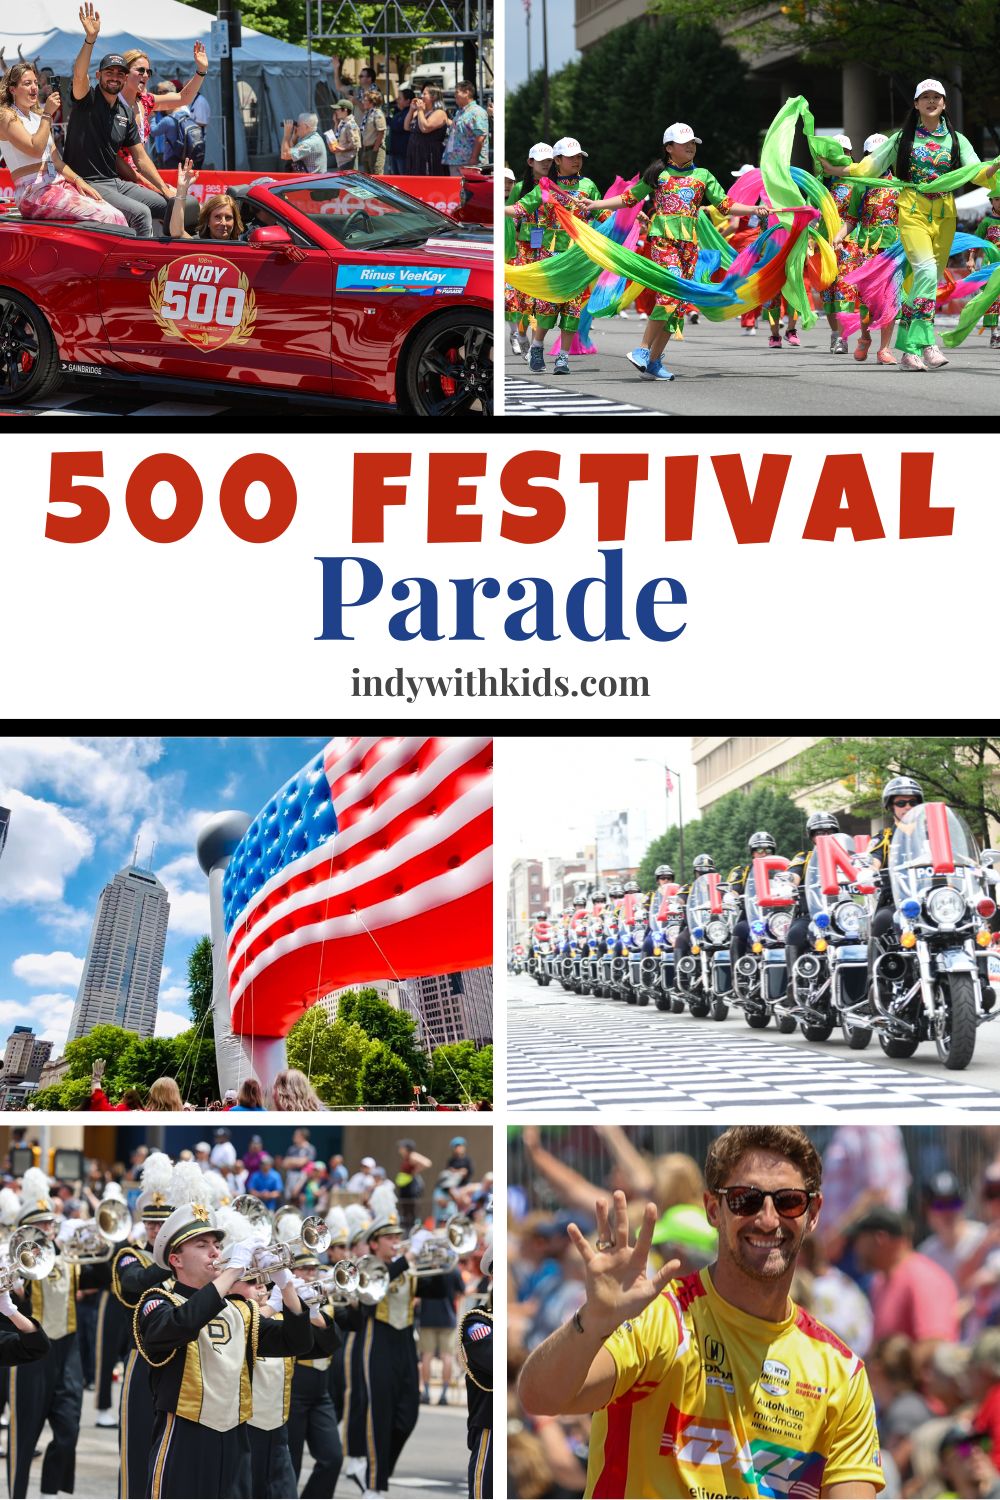 500 Festival Parade in Downtown Indy collage of photos from the parade